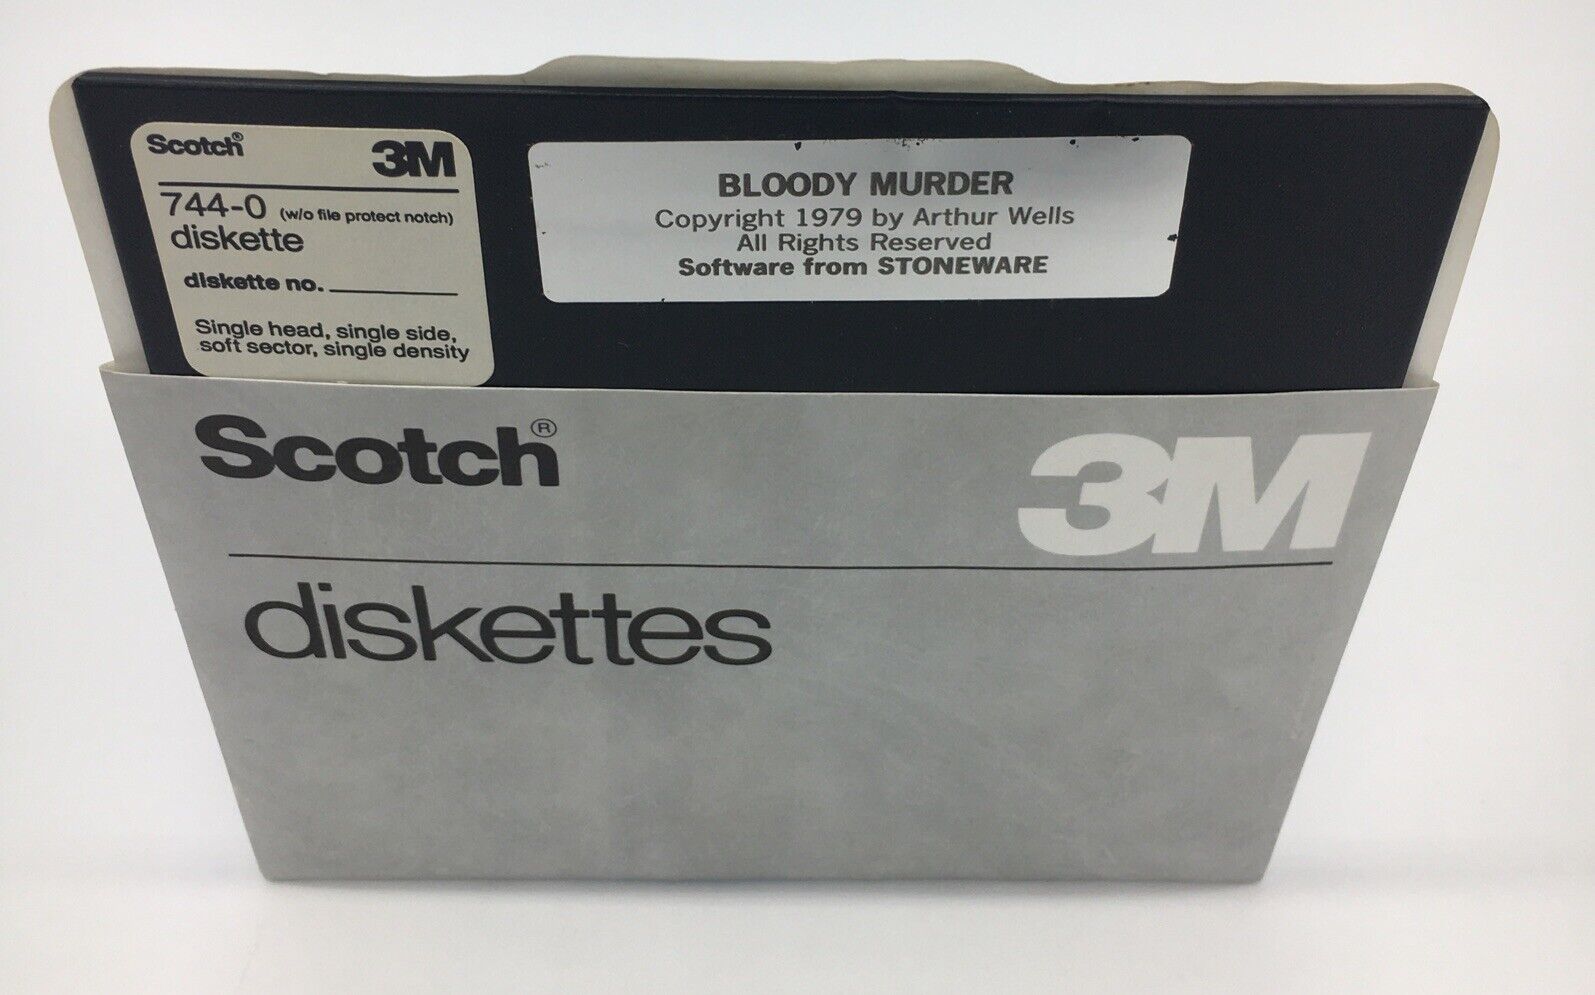 Vtg 1979 Apple II Game Bloody Murder By Stoneware Software Collectible Scarce